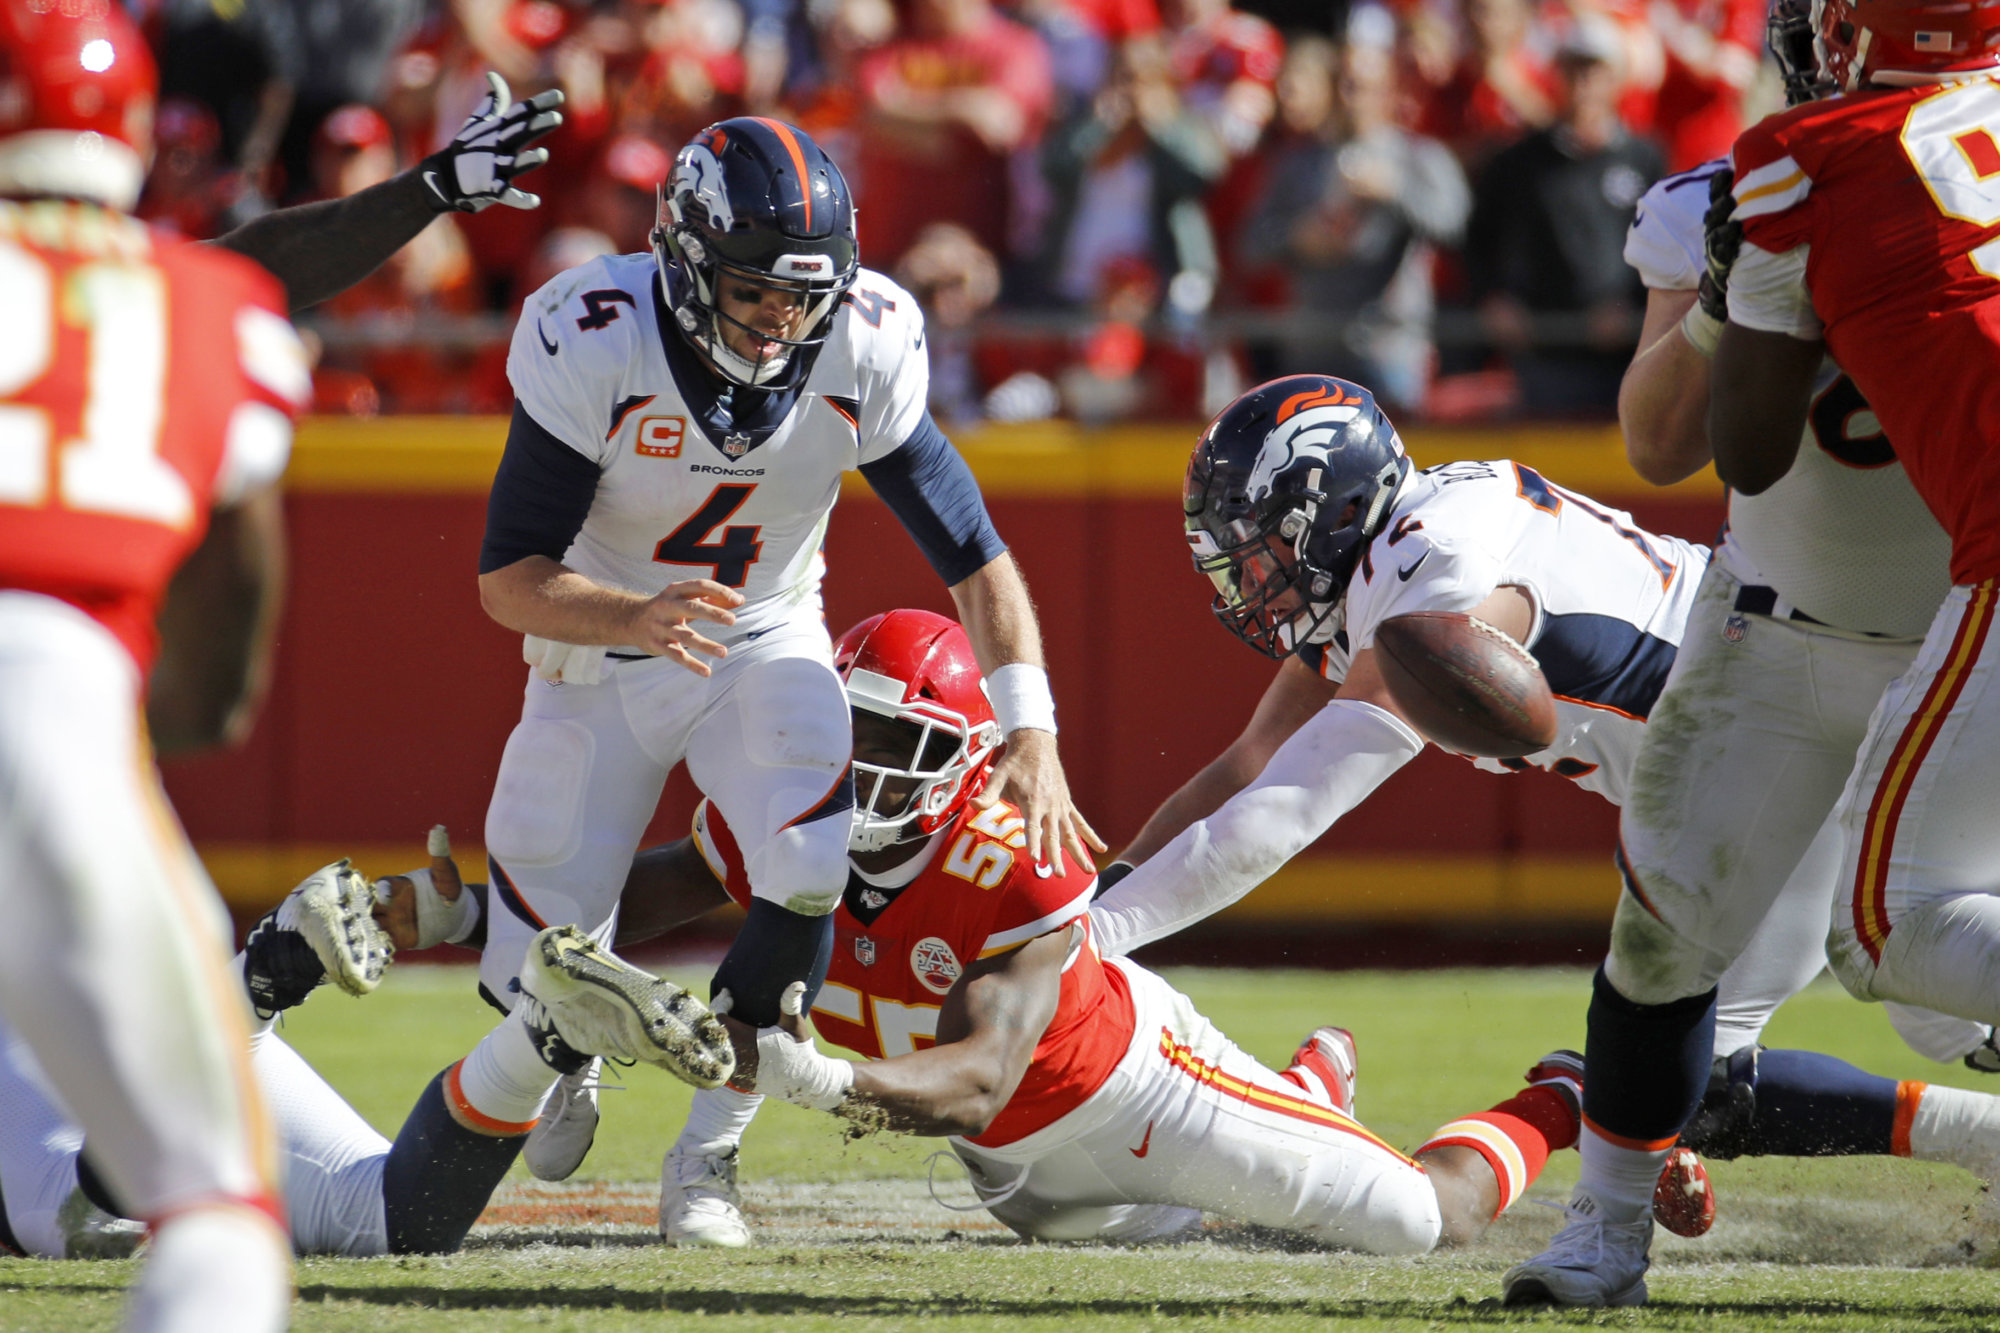 Kansas City Chiefs linebacker Dee Ford (55) sacks Denver Broncos quarterback Case Keenum (4), causing him to fumble the ball for a turnover, during the second half of an NFL football game in Kansas City, Mo., Sunday, Oct. 28, 2018. Linebacker Breeland Speaks (57) recovered the fumble. (AP Photo/Charlie Riedel)